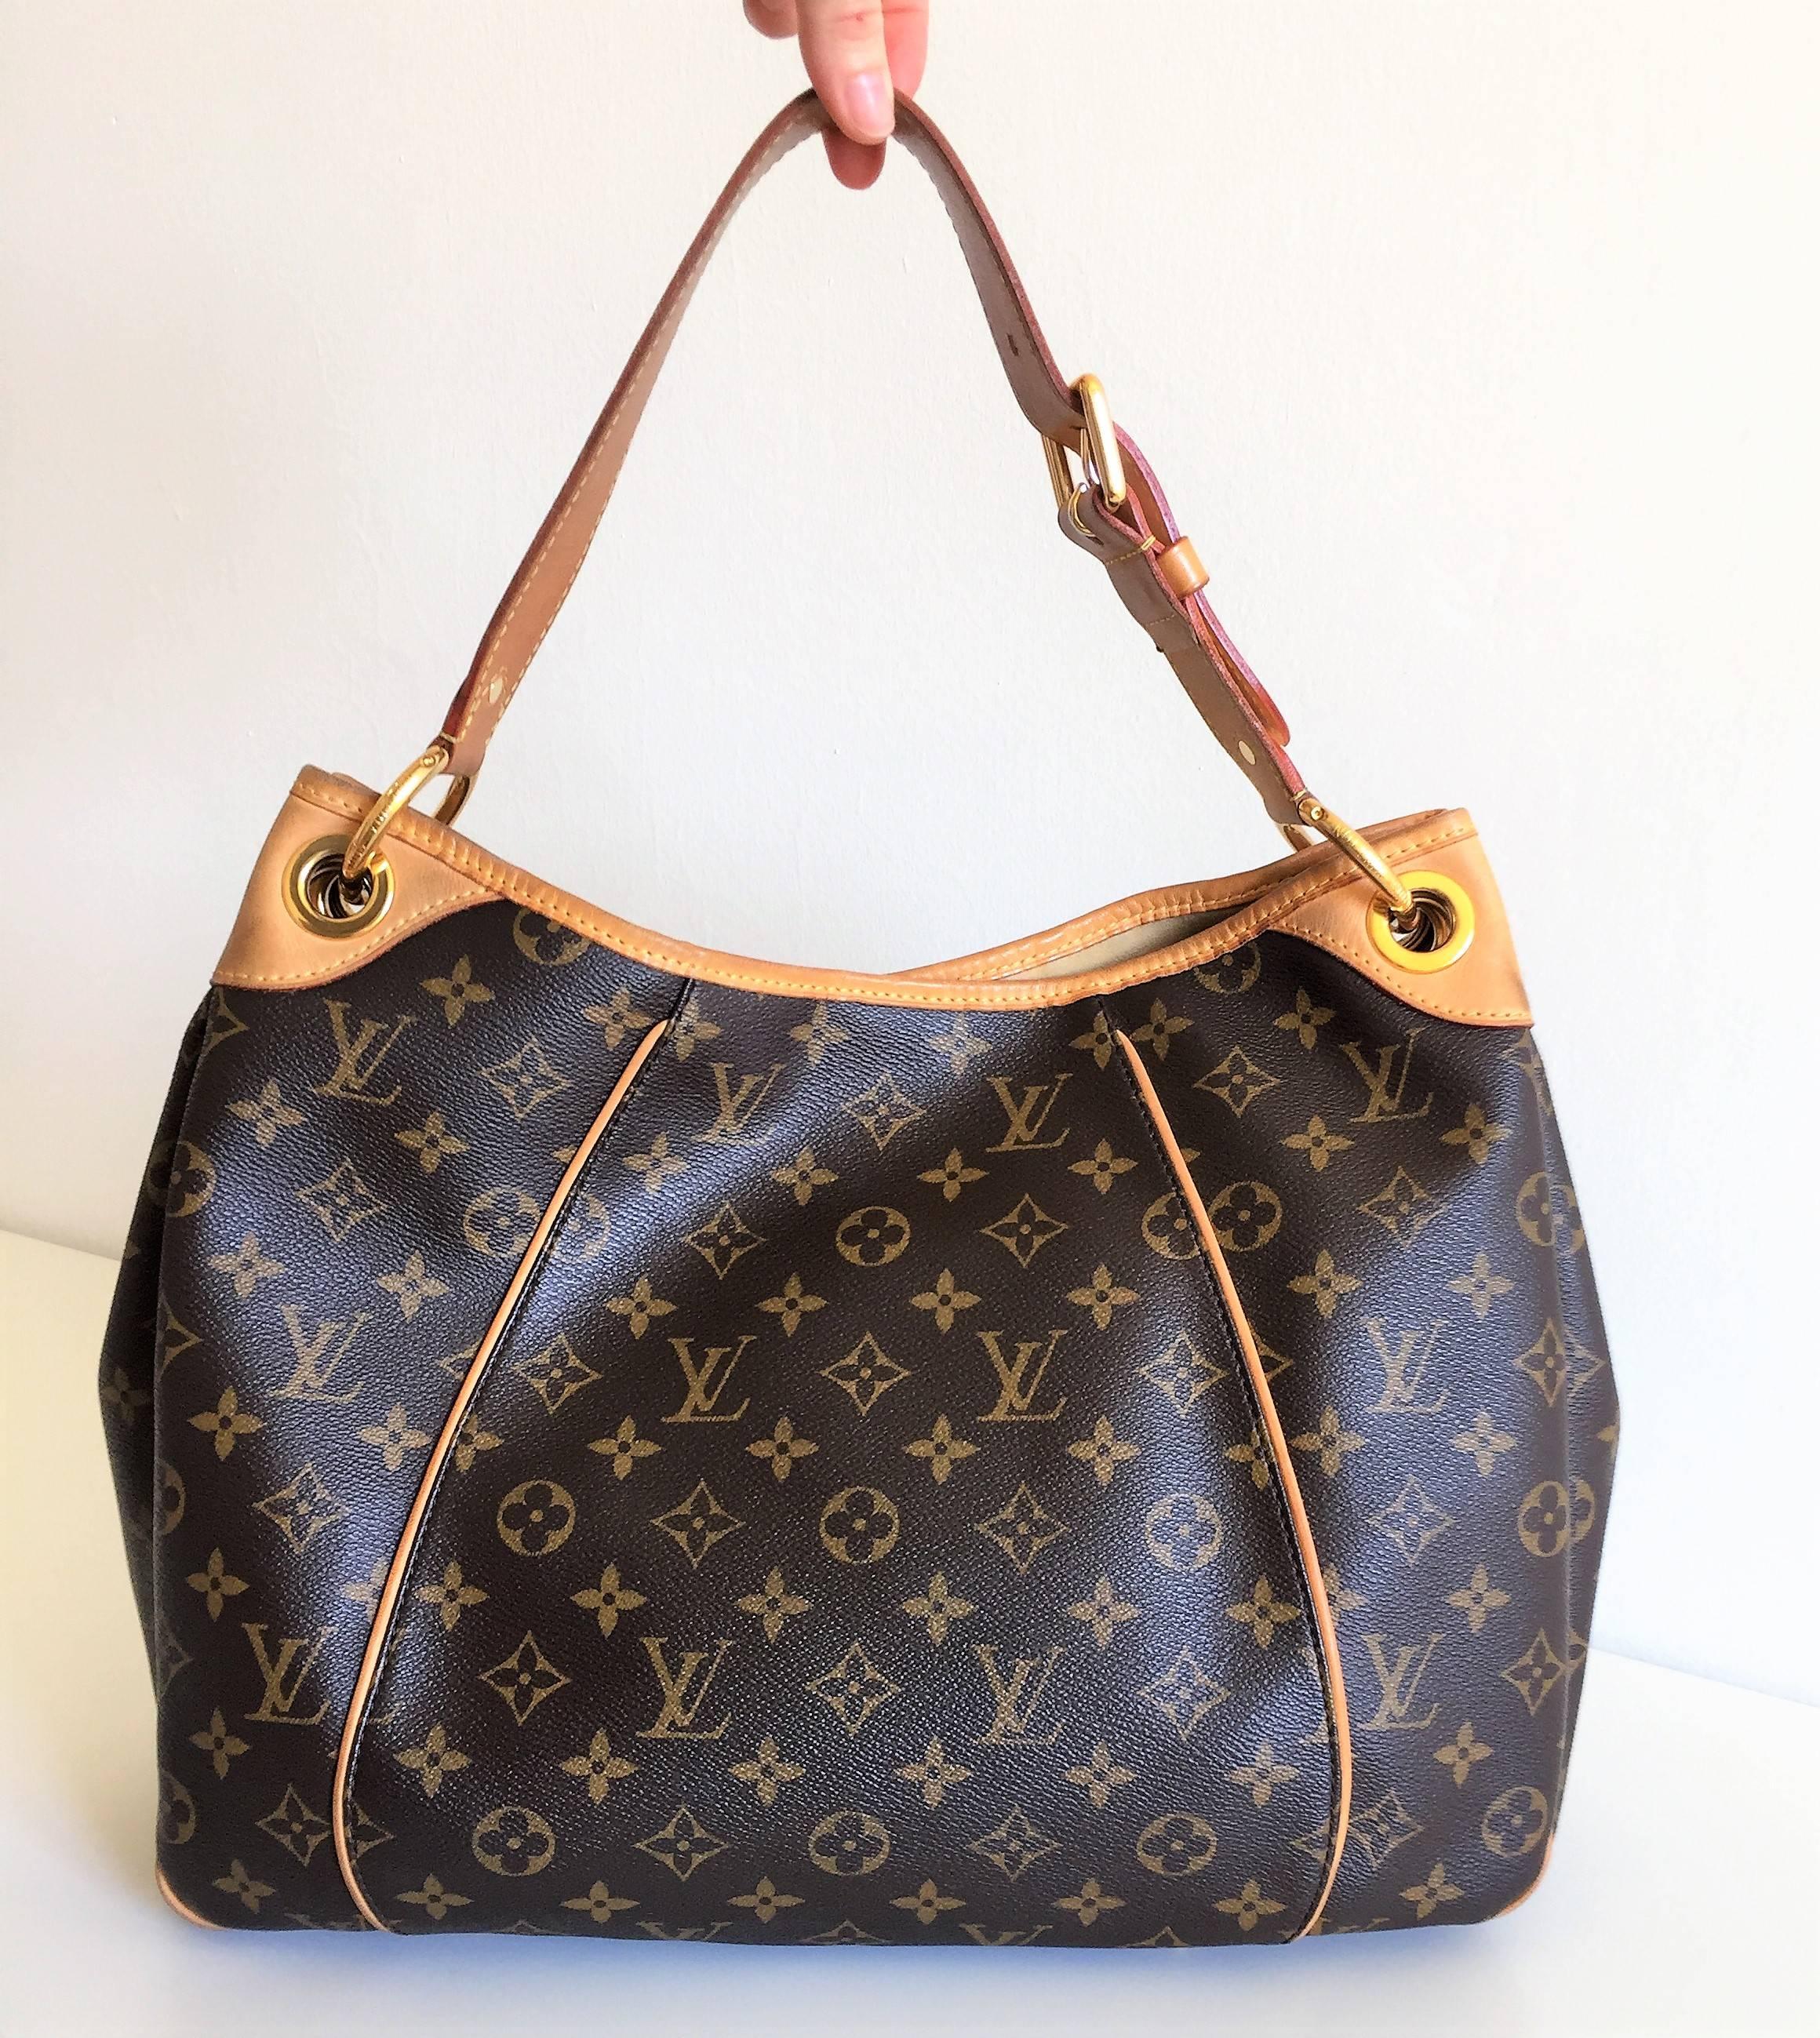 The Louis Vuitton Galliera has been dedicated to the 'Galliera Bulding' in Paris. Built in the XIX century by the Duchess of Galliera and now site of the Fashion Museum, a temple of the Parisian fashion. For the very first time Vuitton put on a bag